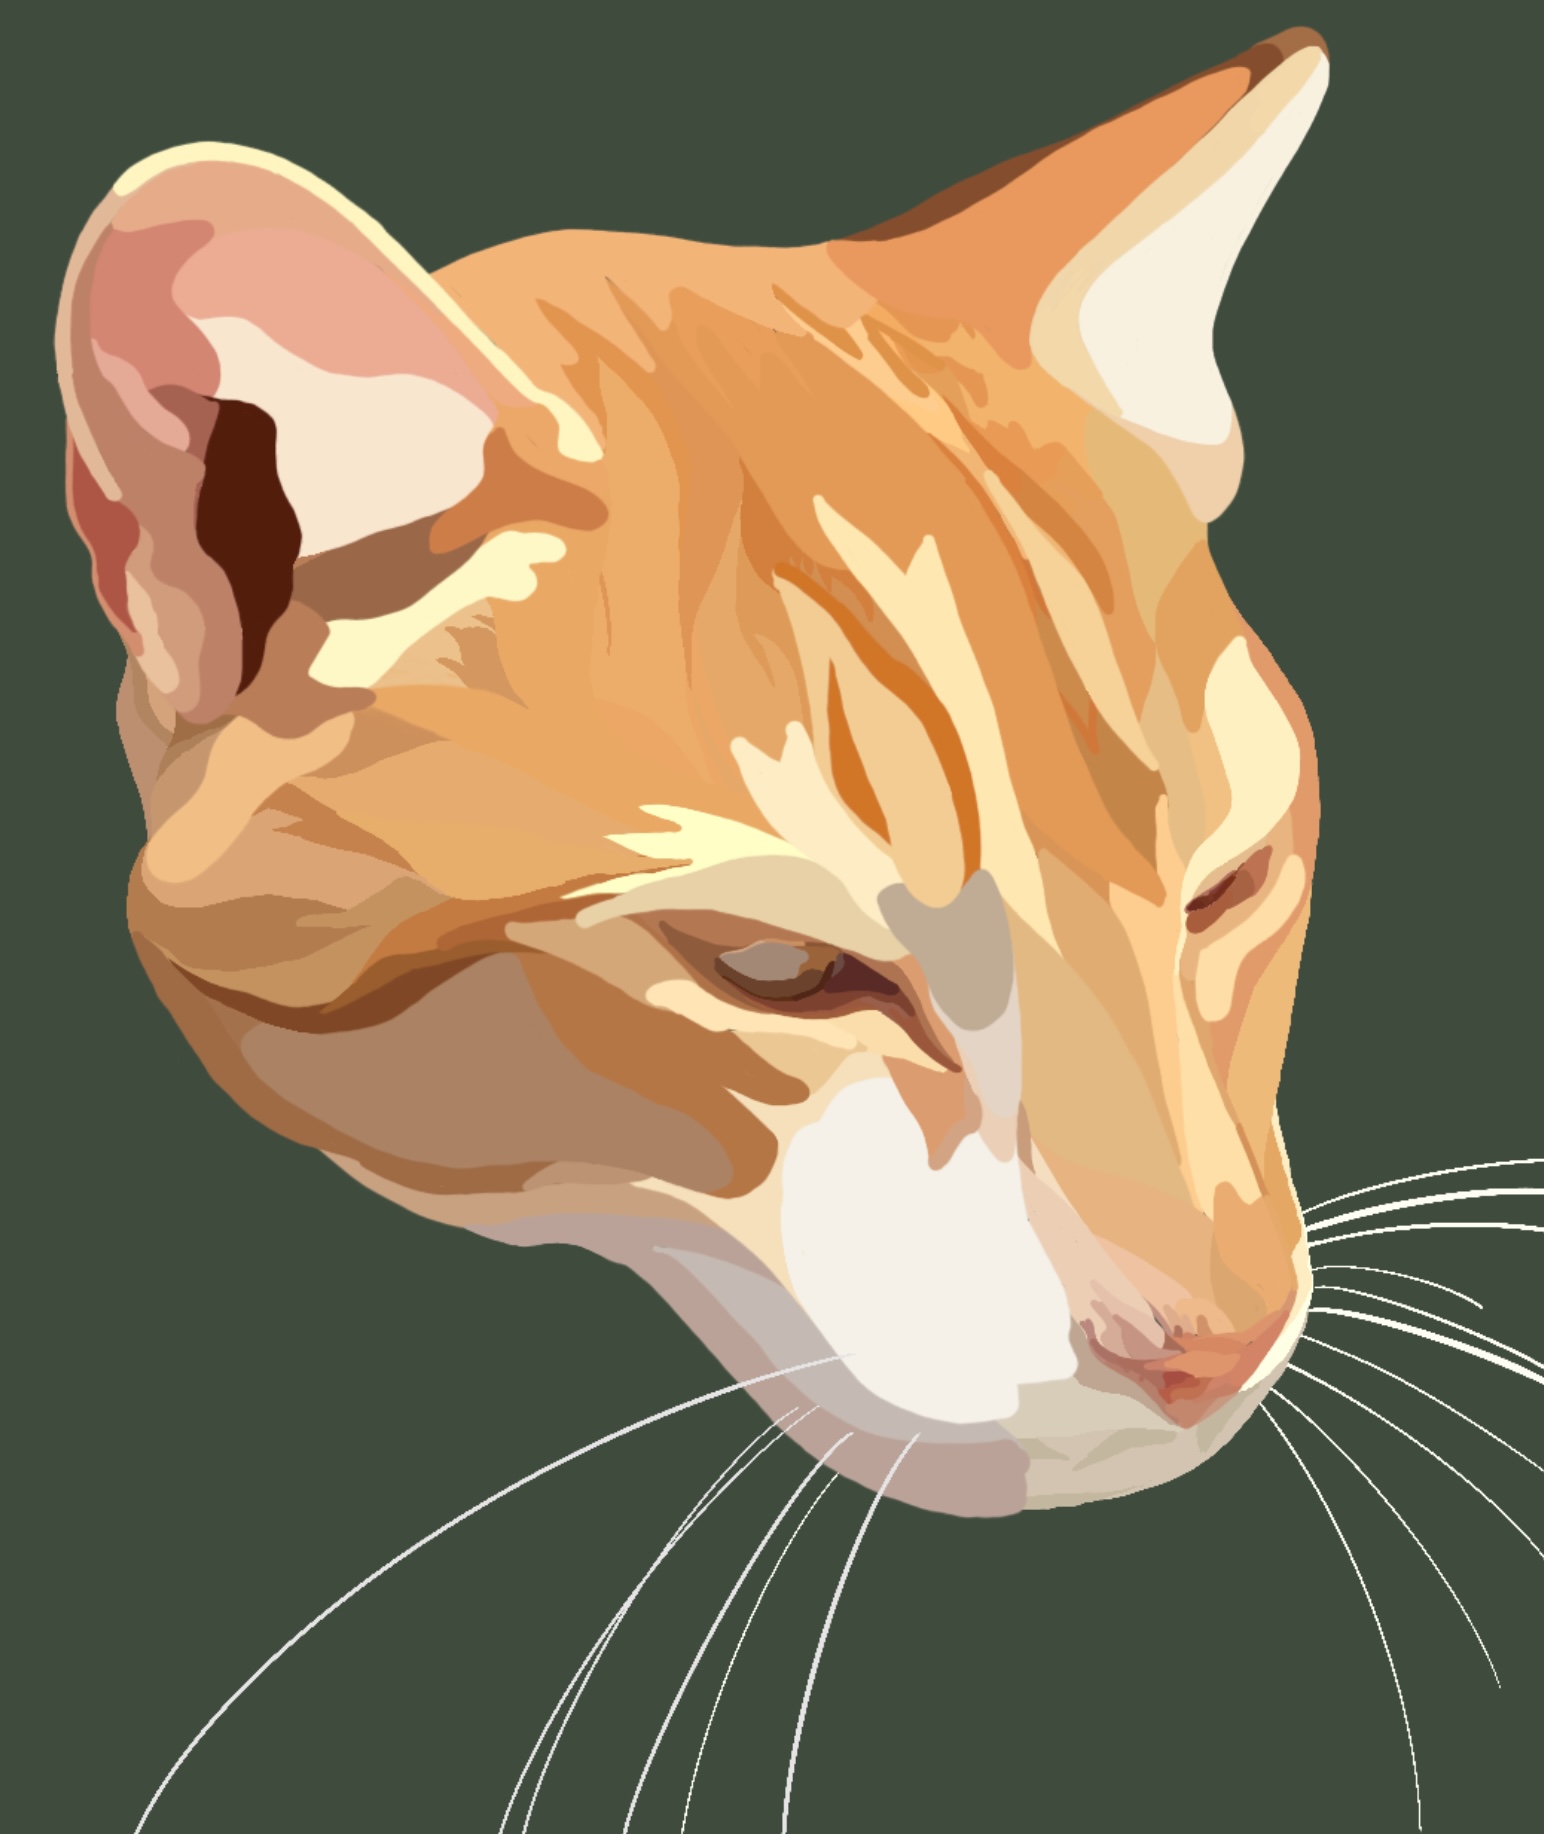 Commissioned artwork of a pet cat called Potato (irrelevant but adorable!)